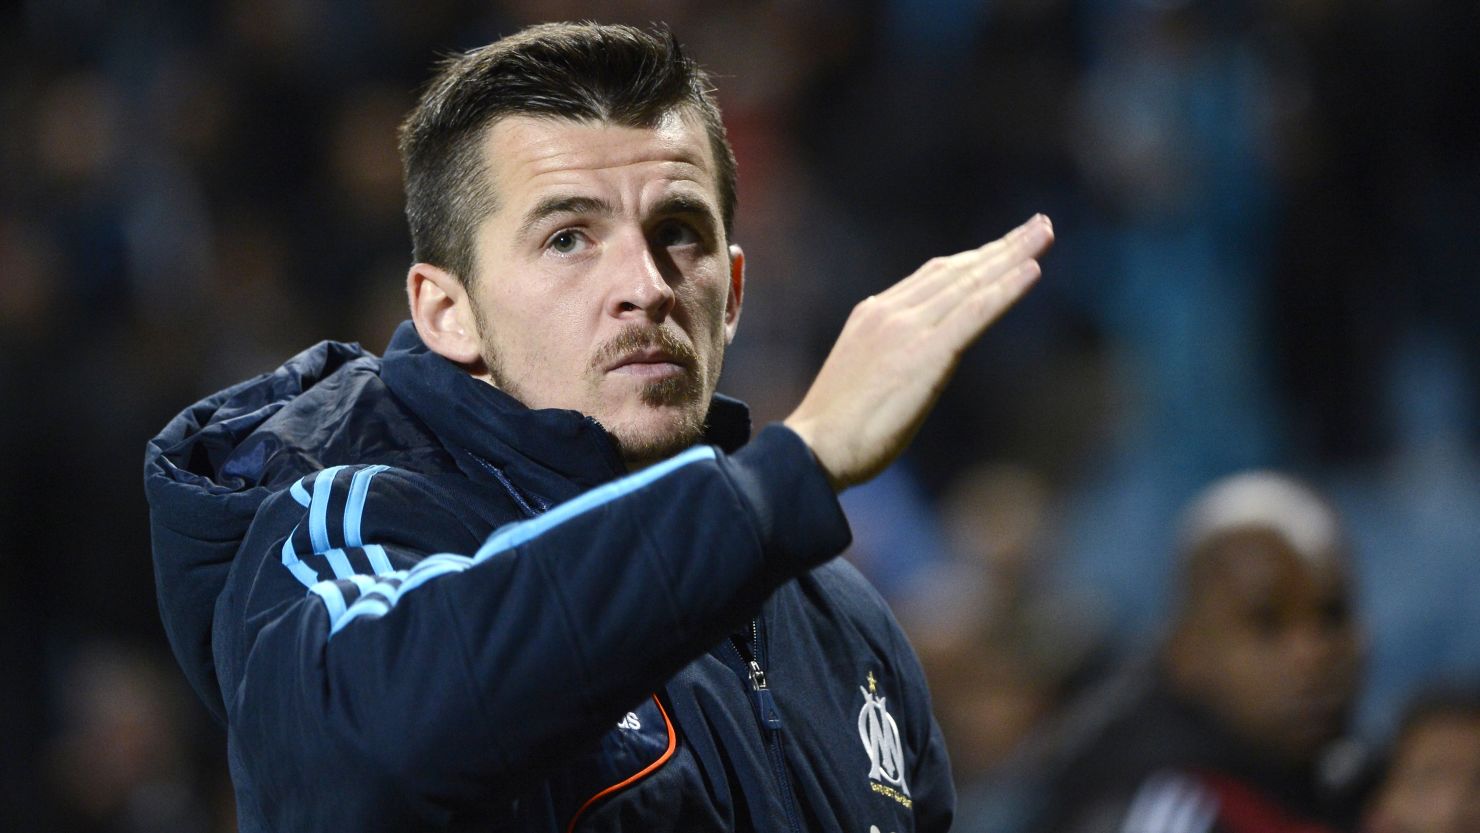 English midfielder Joey Barton is on loan at Marseille from English Premier League team Queens Park Rangers.